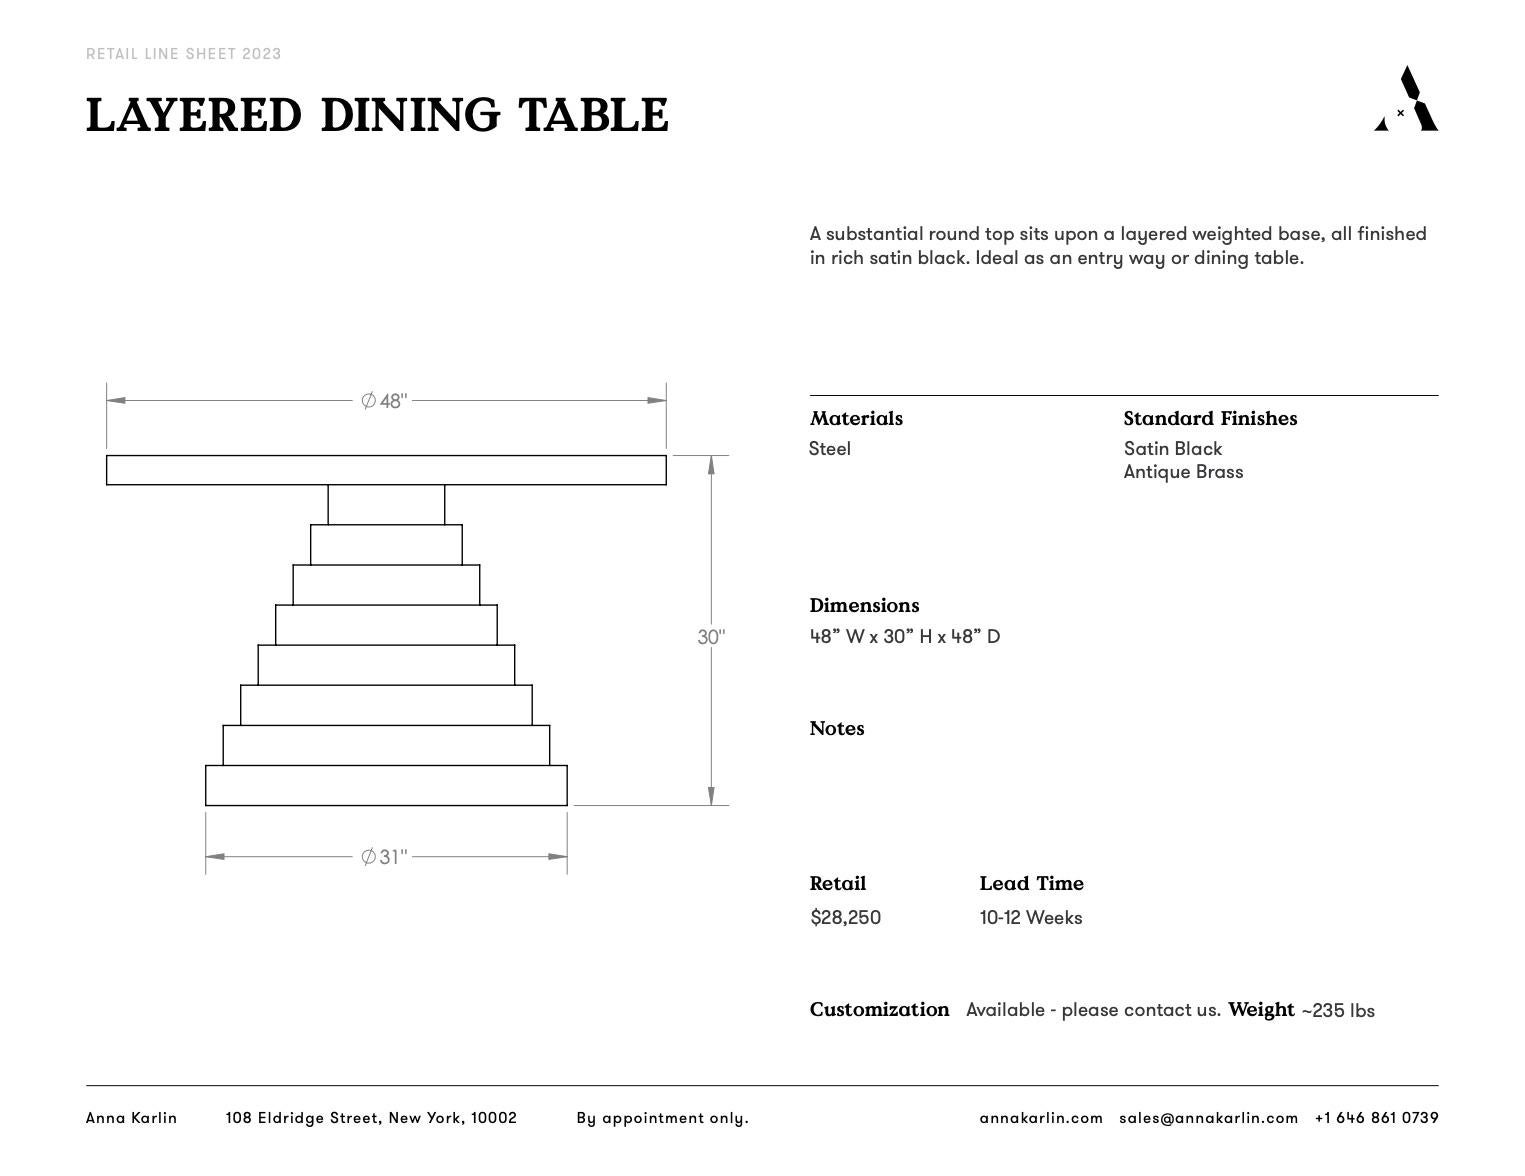 Plated Anna Karlin Layered Dining Table For Sale